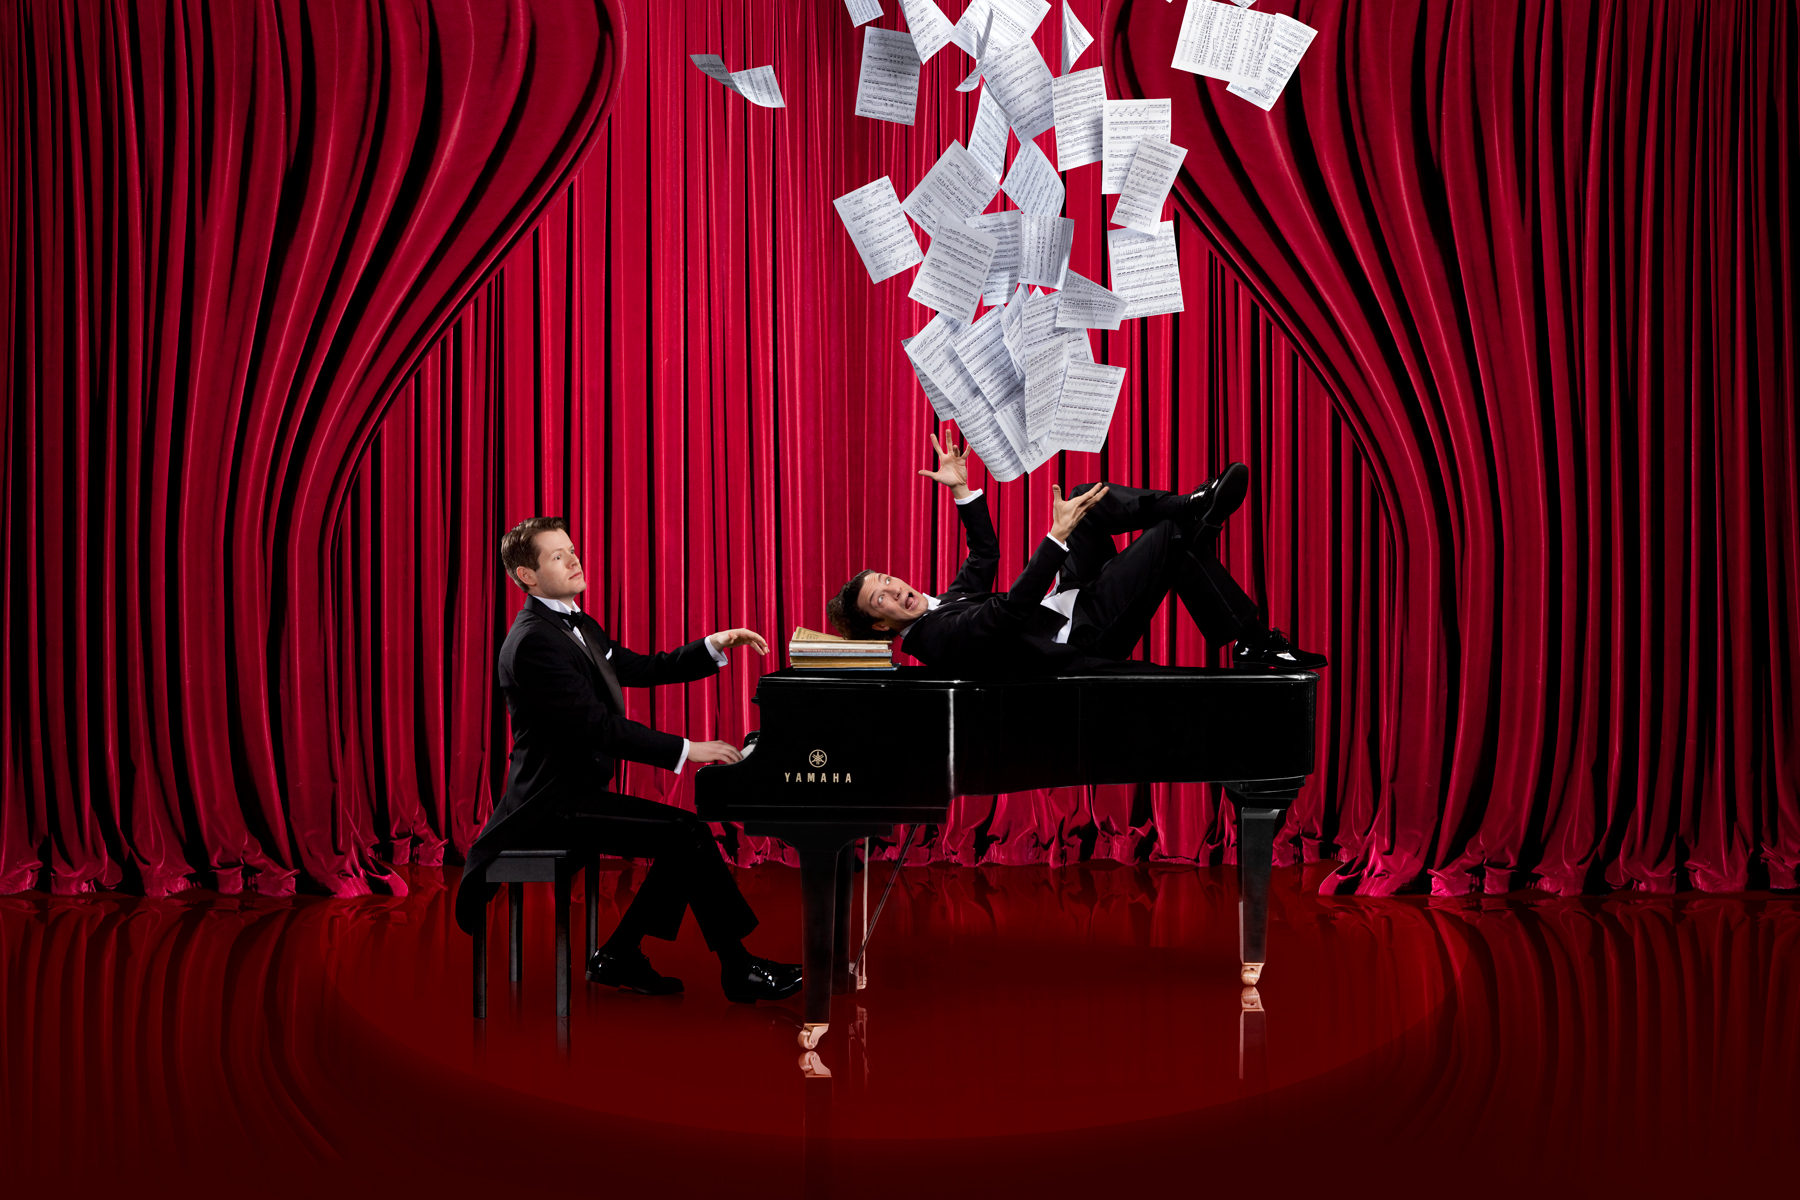 PAST EVENT: 2 Pianos 4 Hands – Thousand Islands Playhouse, Springer Theatre, May 24 – June 16, 2018